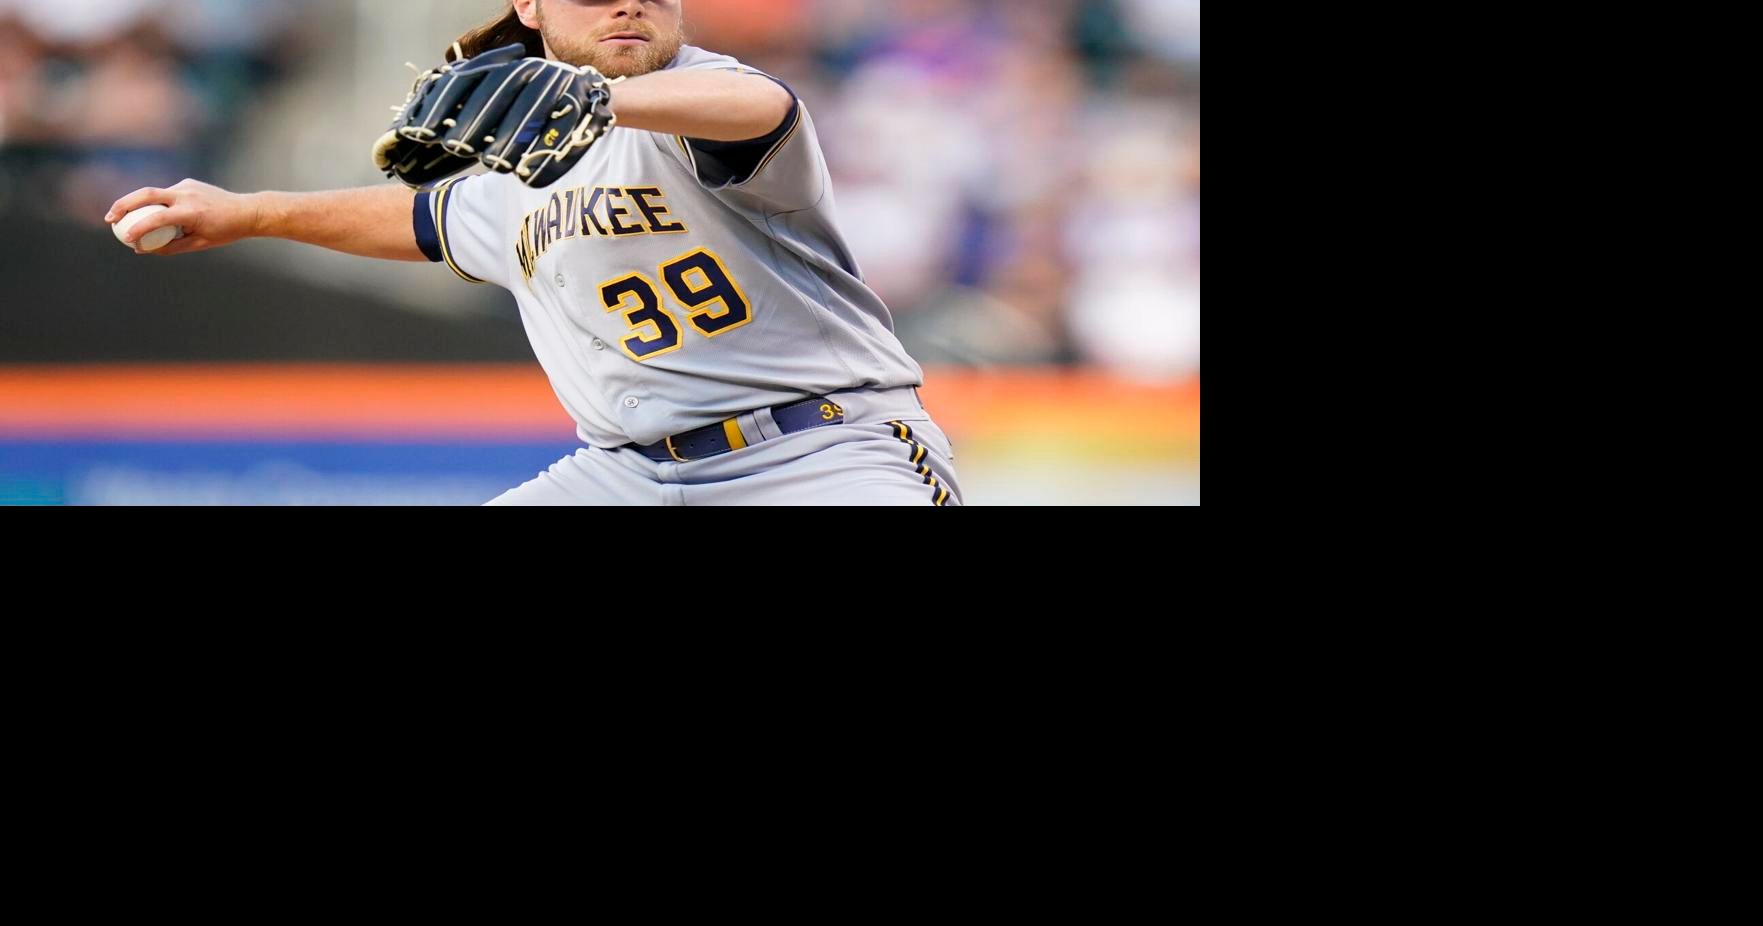 Milwaukee Brewers starter Corbin Burnes adjusts his hair as he pitches  against the Pittsburgh Pirates during the first inning of a baseball game,  Tuesday, Aug. 2, 2022, in Pittsburgh. (AP Photo/Keith Srakocic